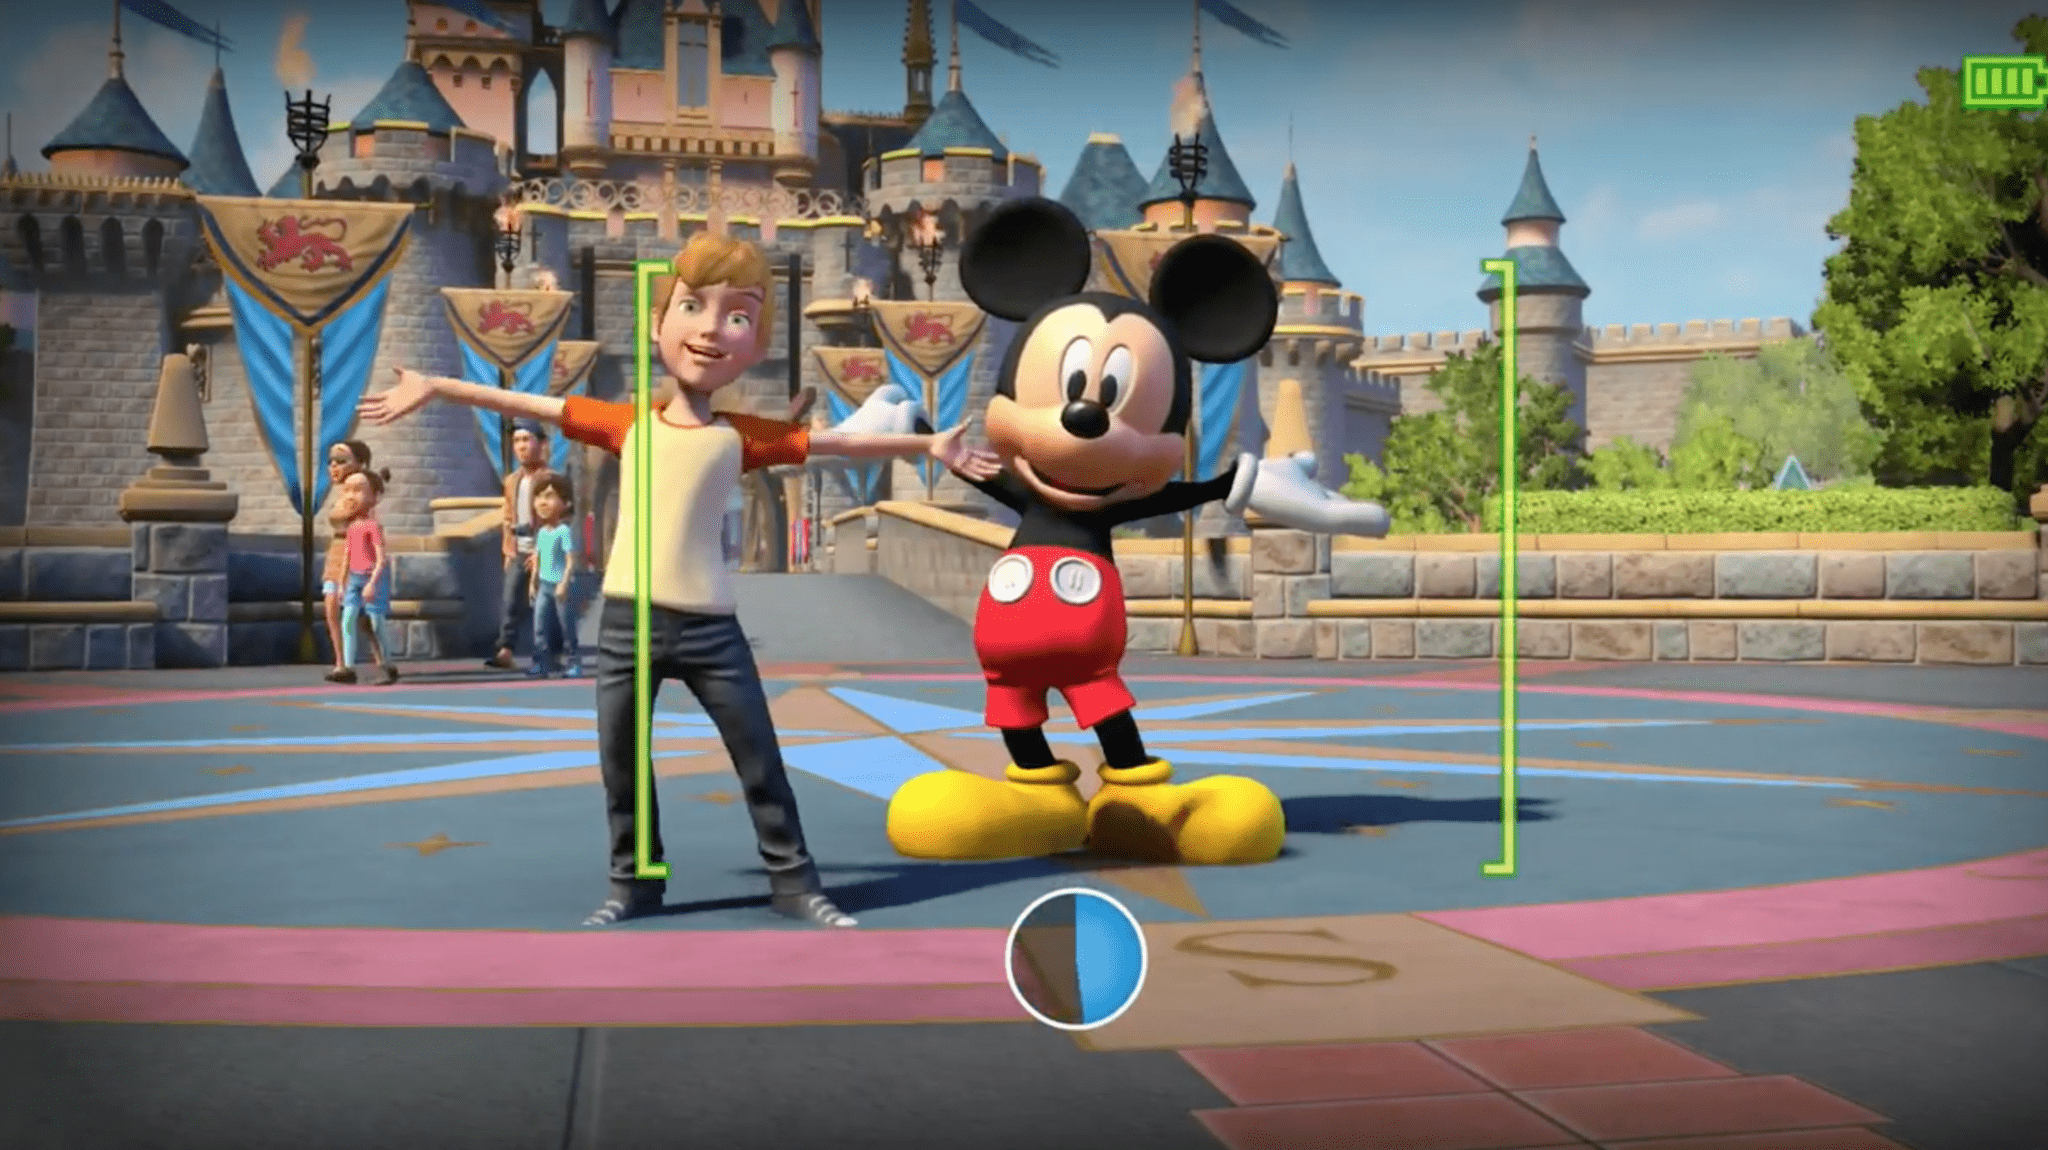 Vos jeux terminés en 2022 - Page 24 Review-video-disneyland-adventures-for-xbox-one-offers-a-pretty-recreation-of-disneyland-with-boring-gameplay-2